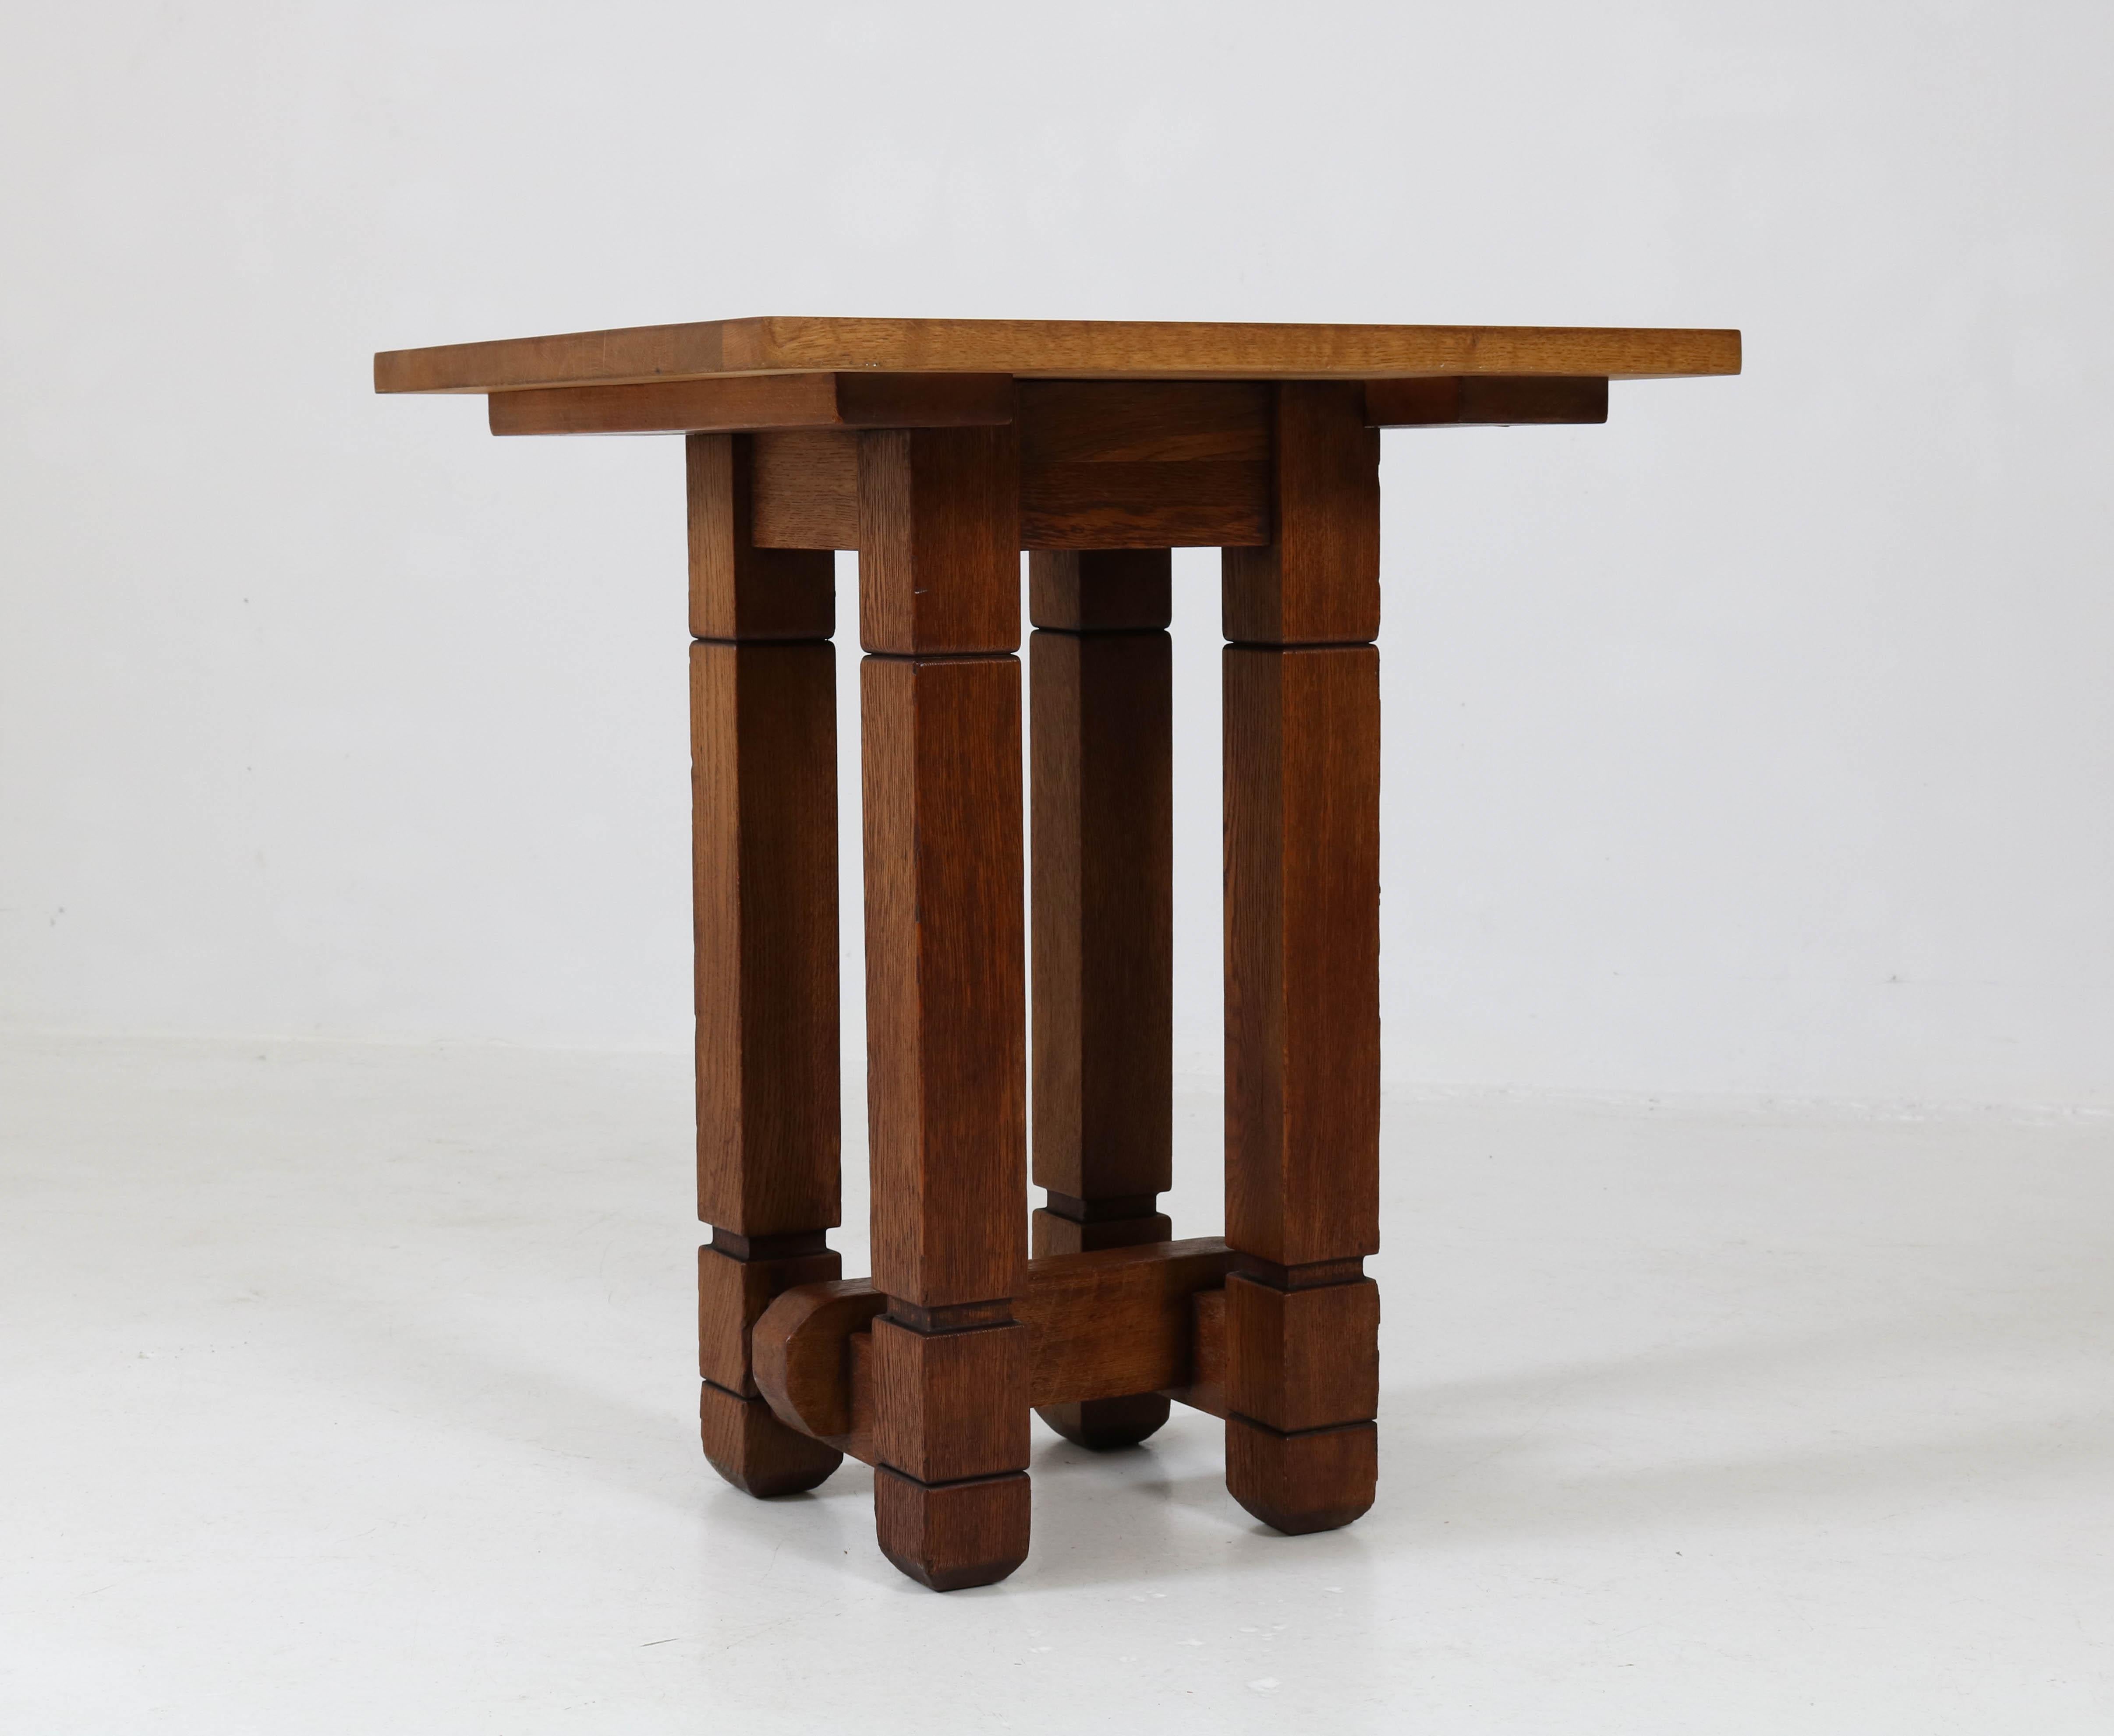 Mid-20th Century Oak Art Deco Coffee Table by A.R. Wittop Koning for J.H. Huizinga, 1938